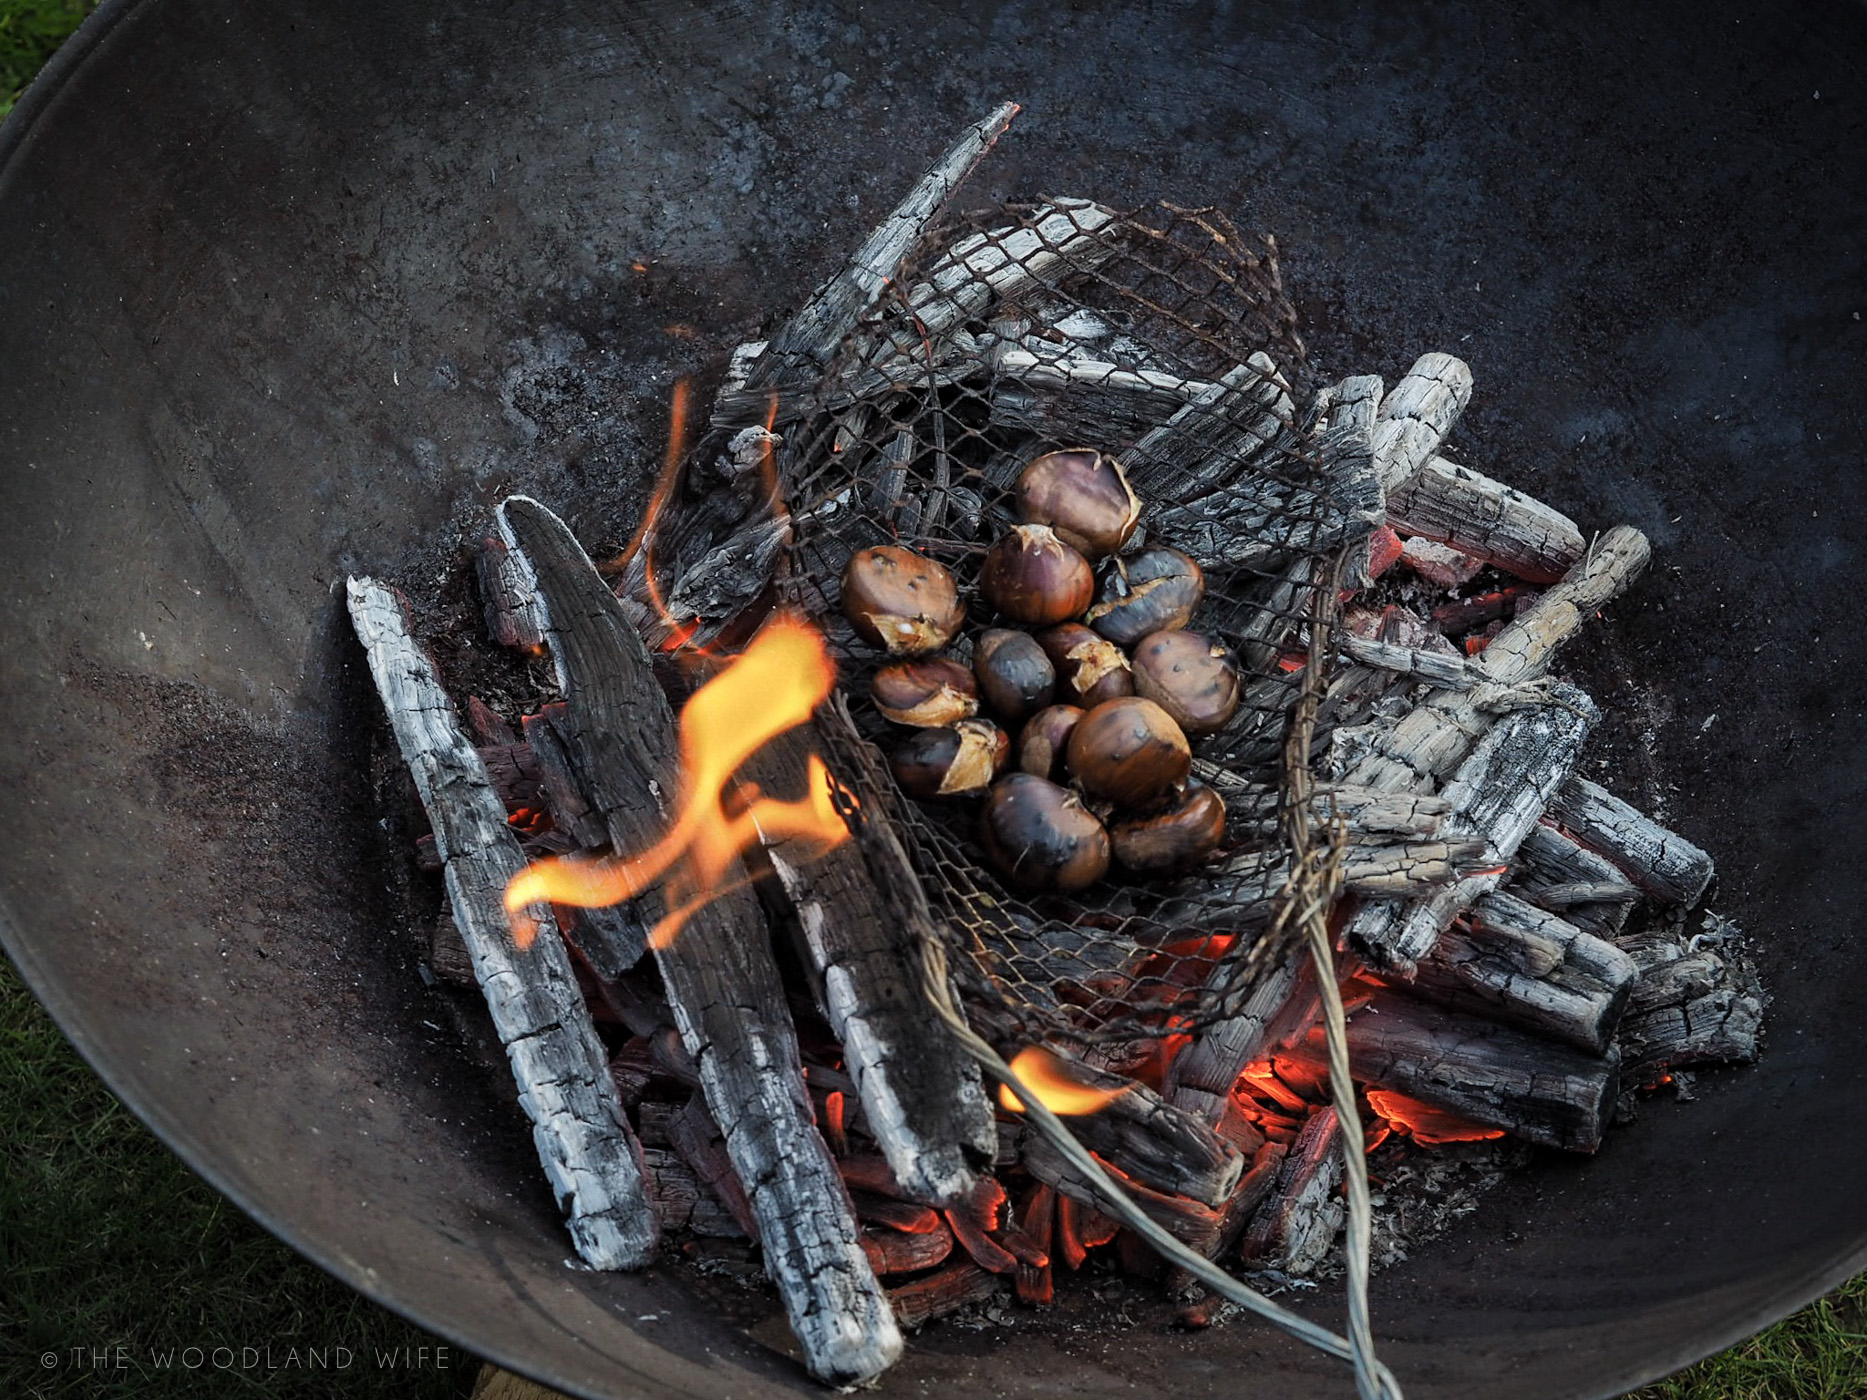 The Woodland Wife - Roasting Chestnuts in the woods - The taste of Autumn - Gather, Roast, Feast on sweet chestnuts